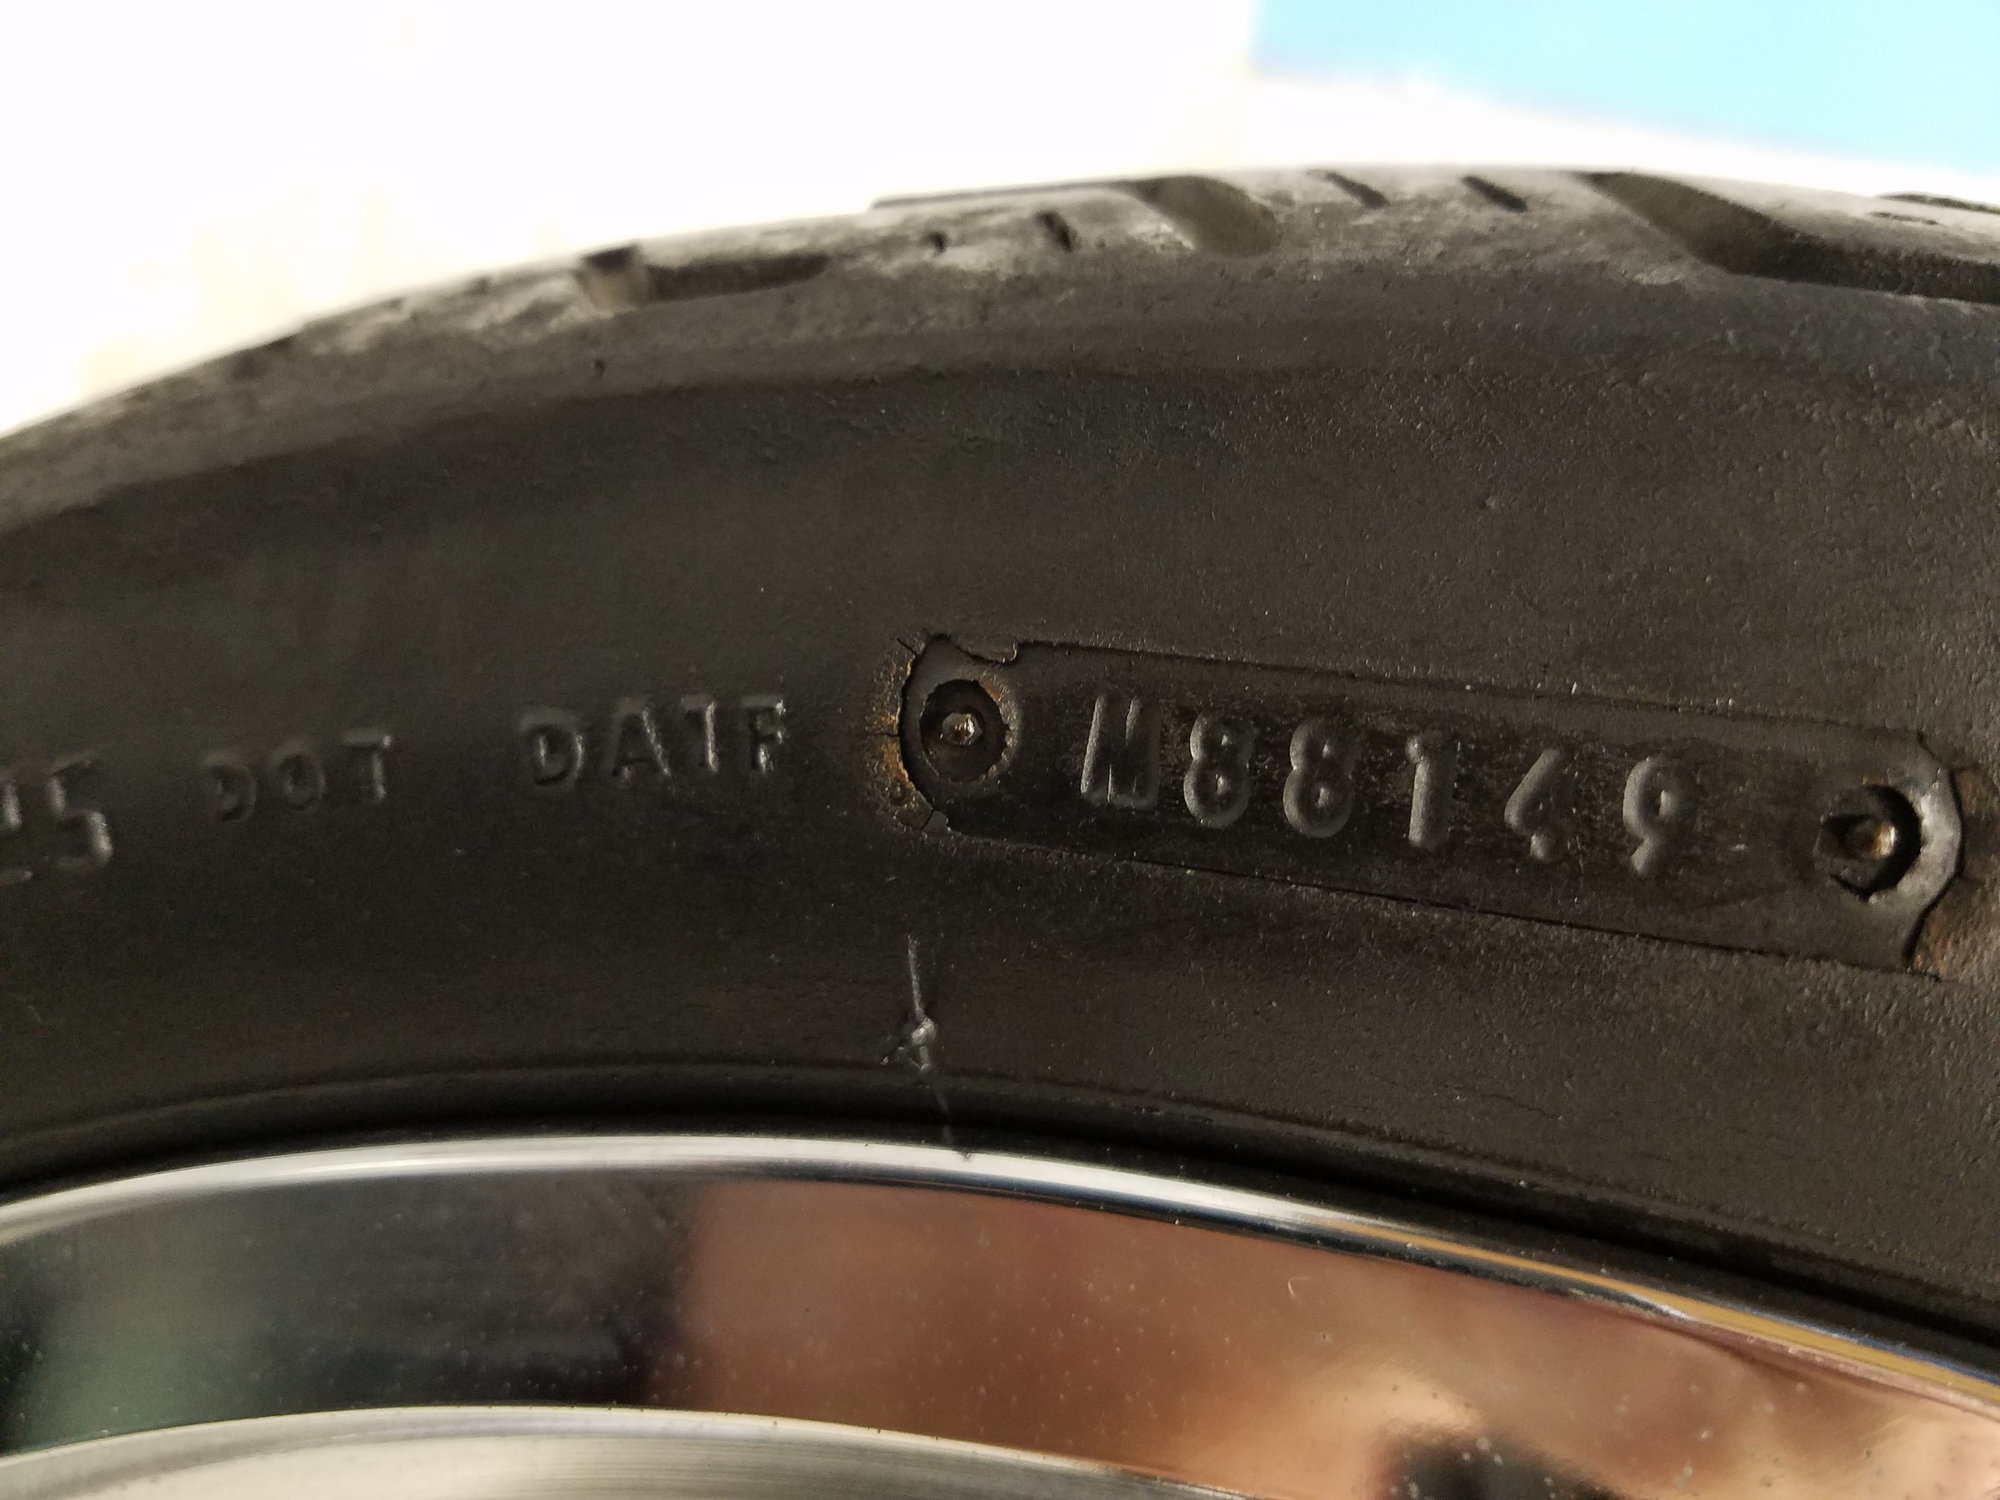 dunlop-motorcycle-tires-date-code-reviewmotors-co